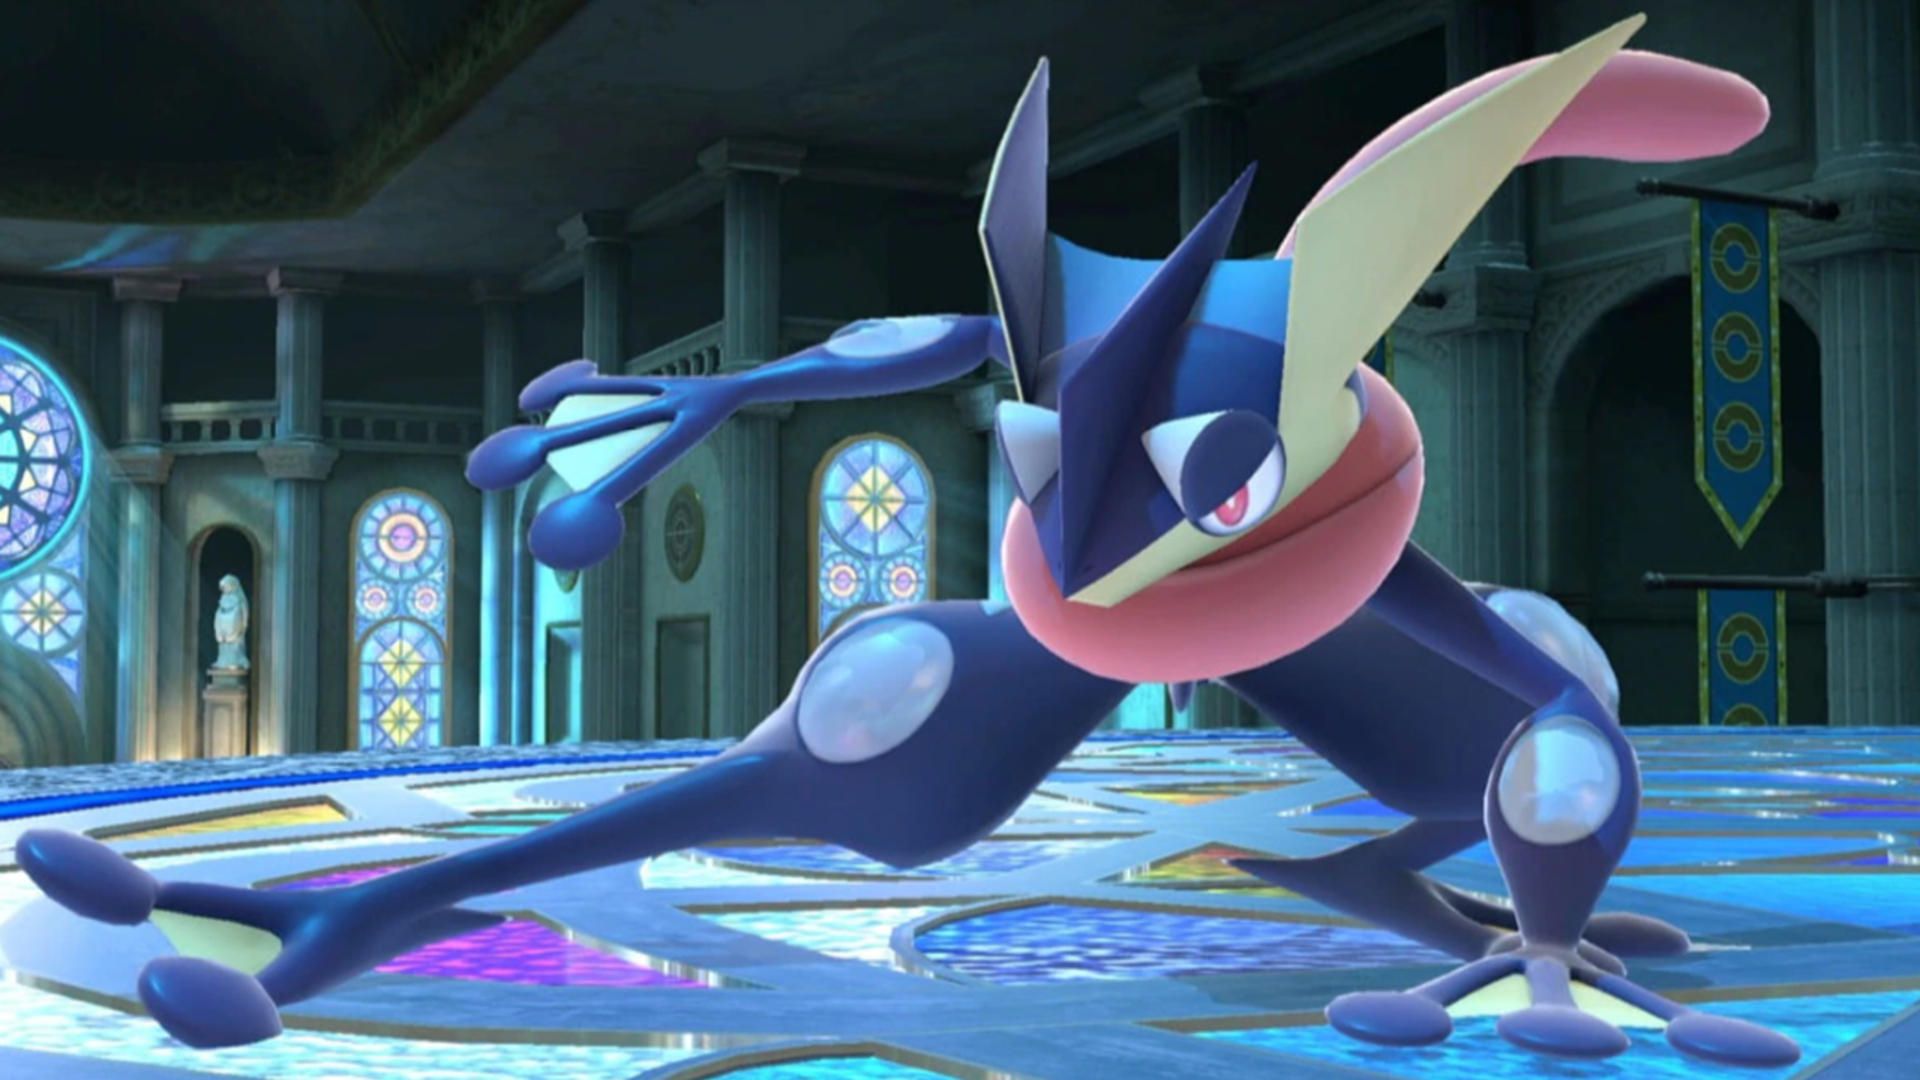 Greninja is the Pokemon of the Year for Pikachu not even